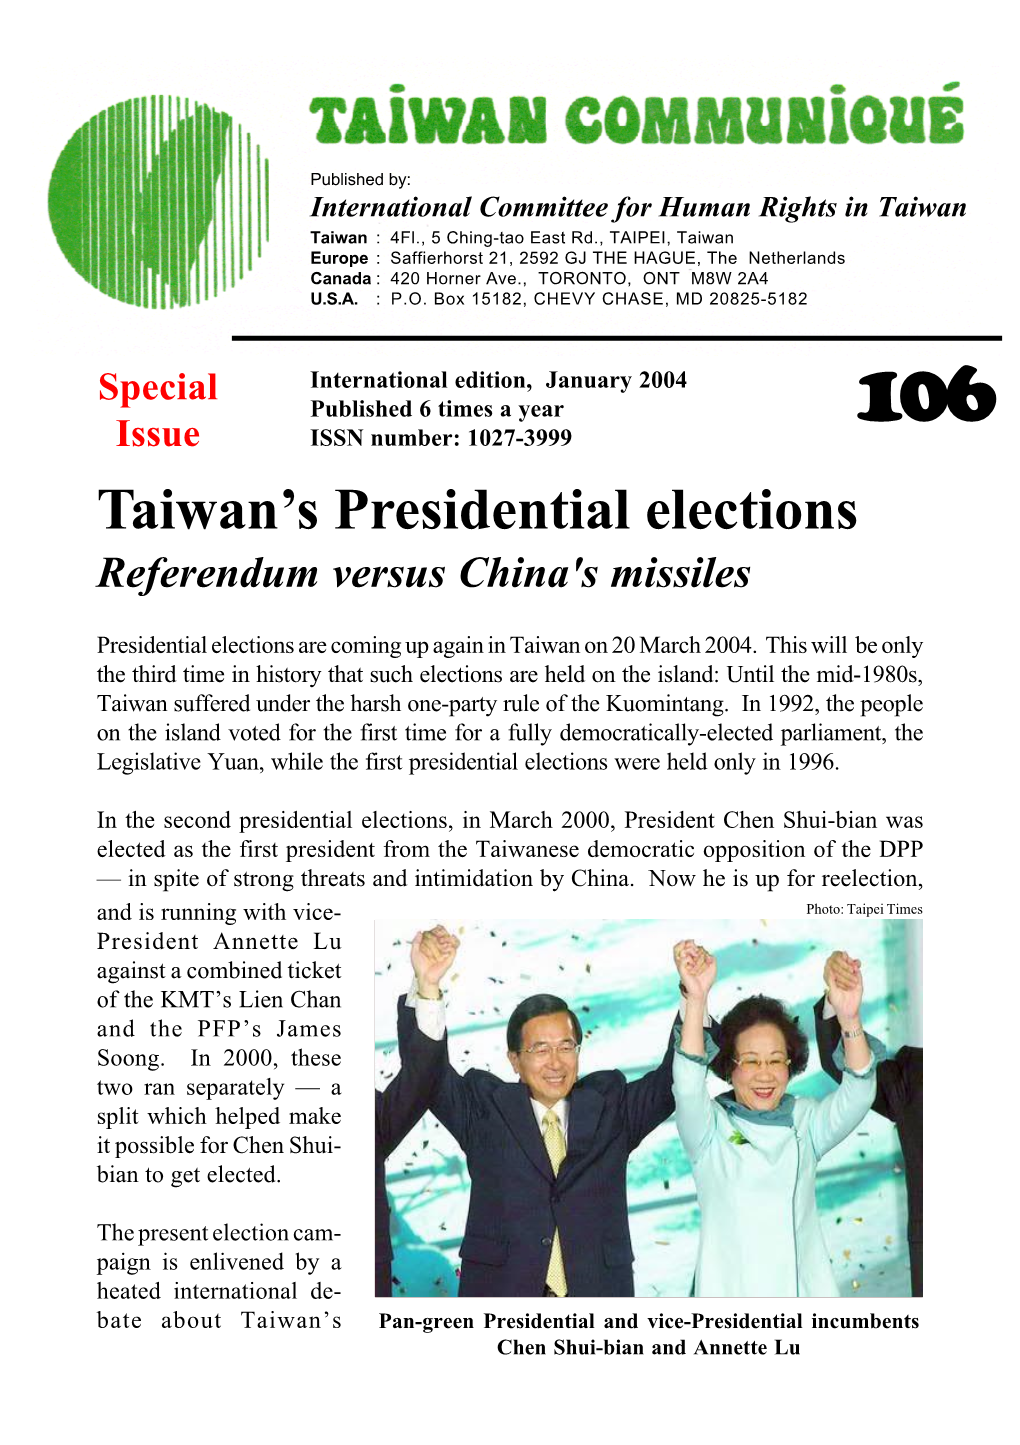 Taiwan's Presidential Elections Referendum Versus China's Missiles